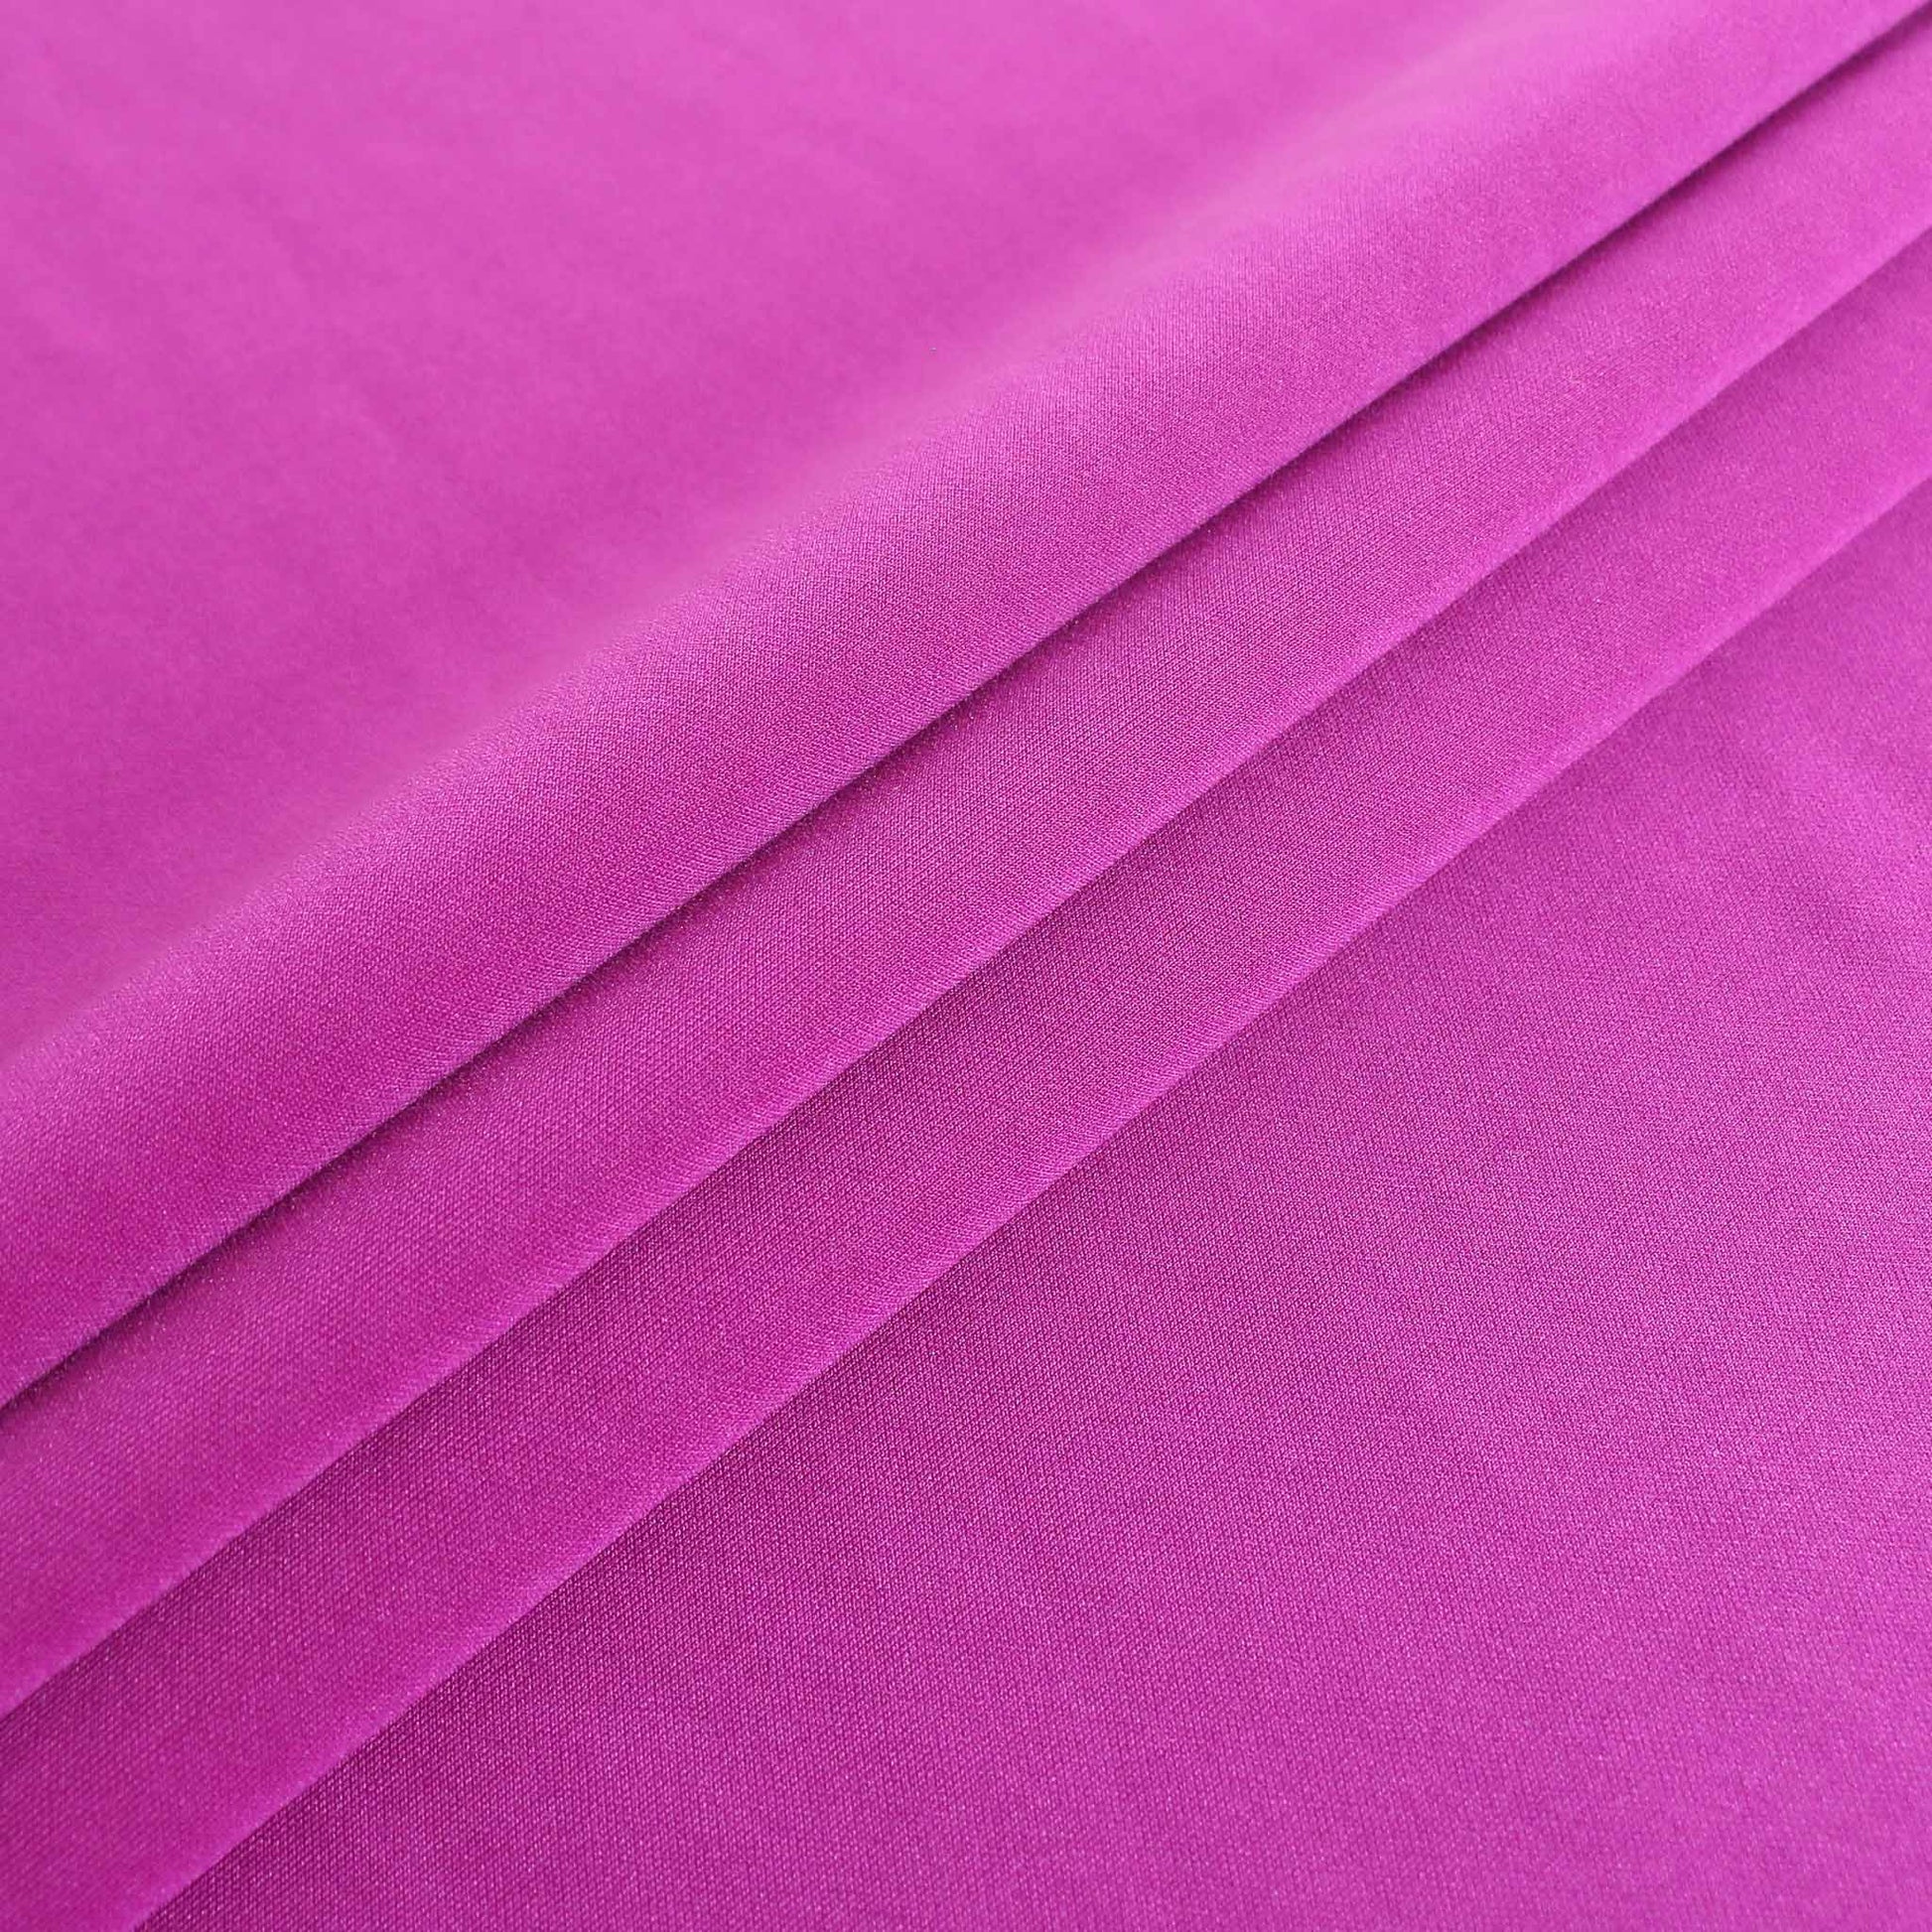 stretchy jersey scuba fabric for dressmaking in purple colour